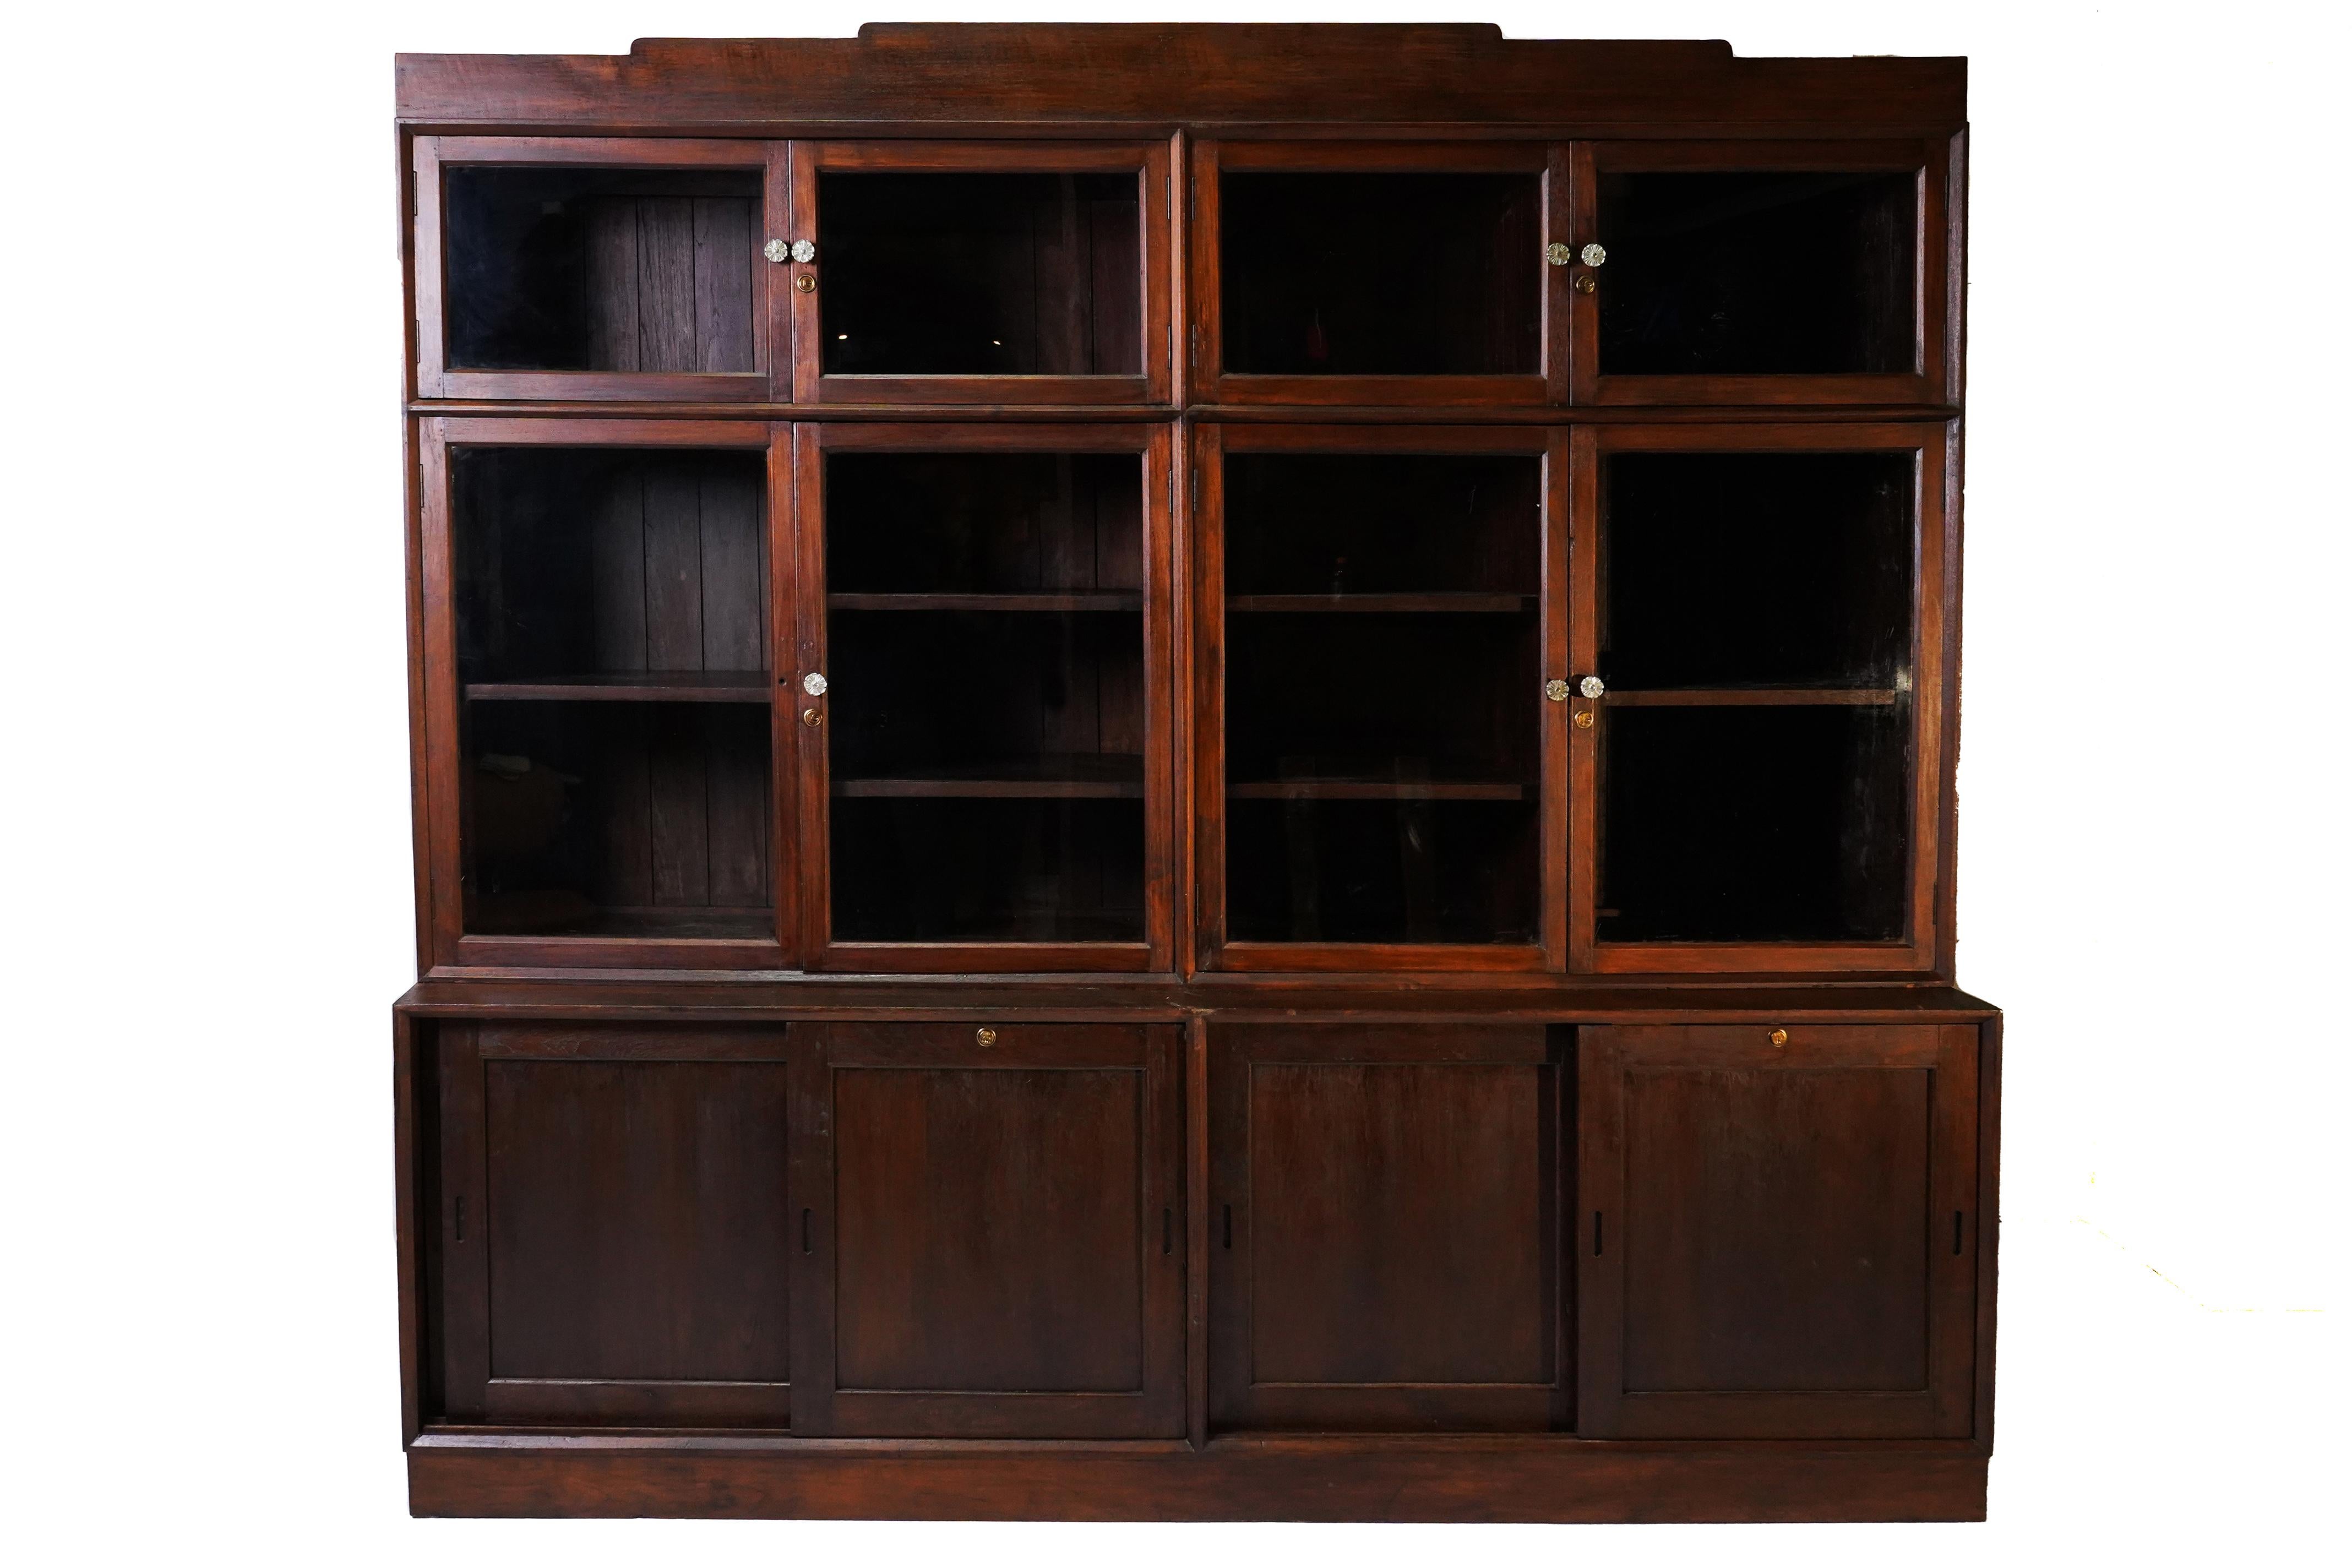 This solid teak bookcase was made in a sleek, modern style in Rangoon, Burma, near the very end of the British Empire. We call these pieces by different names; 